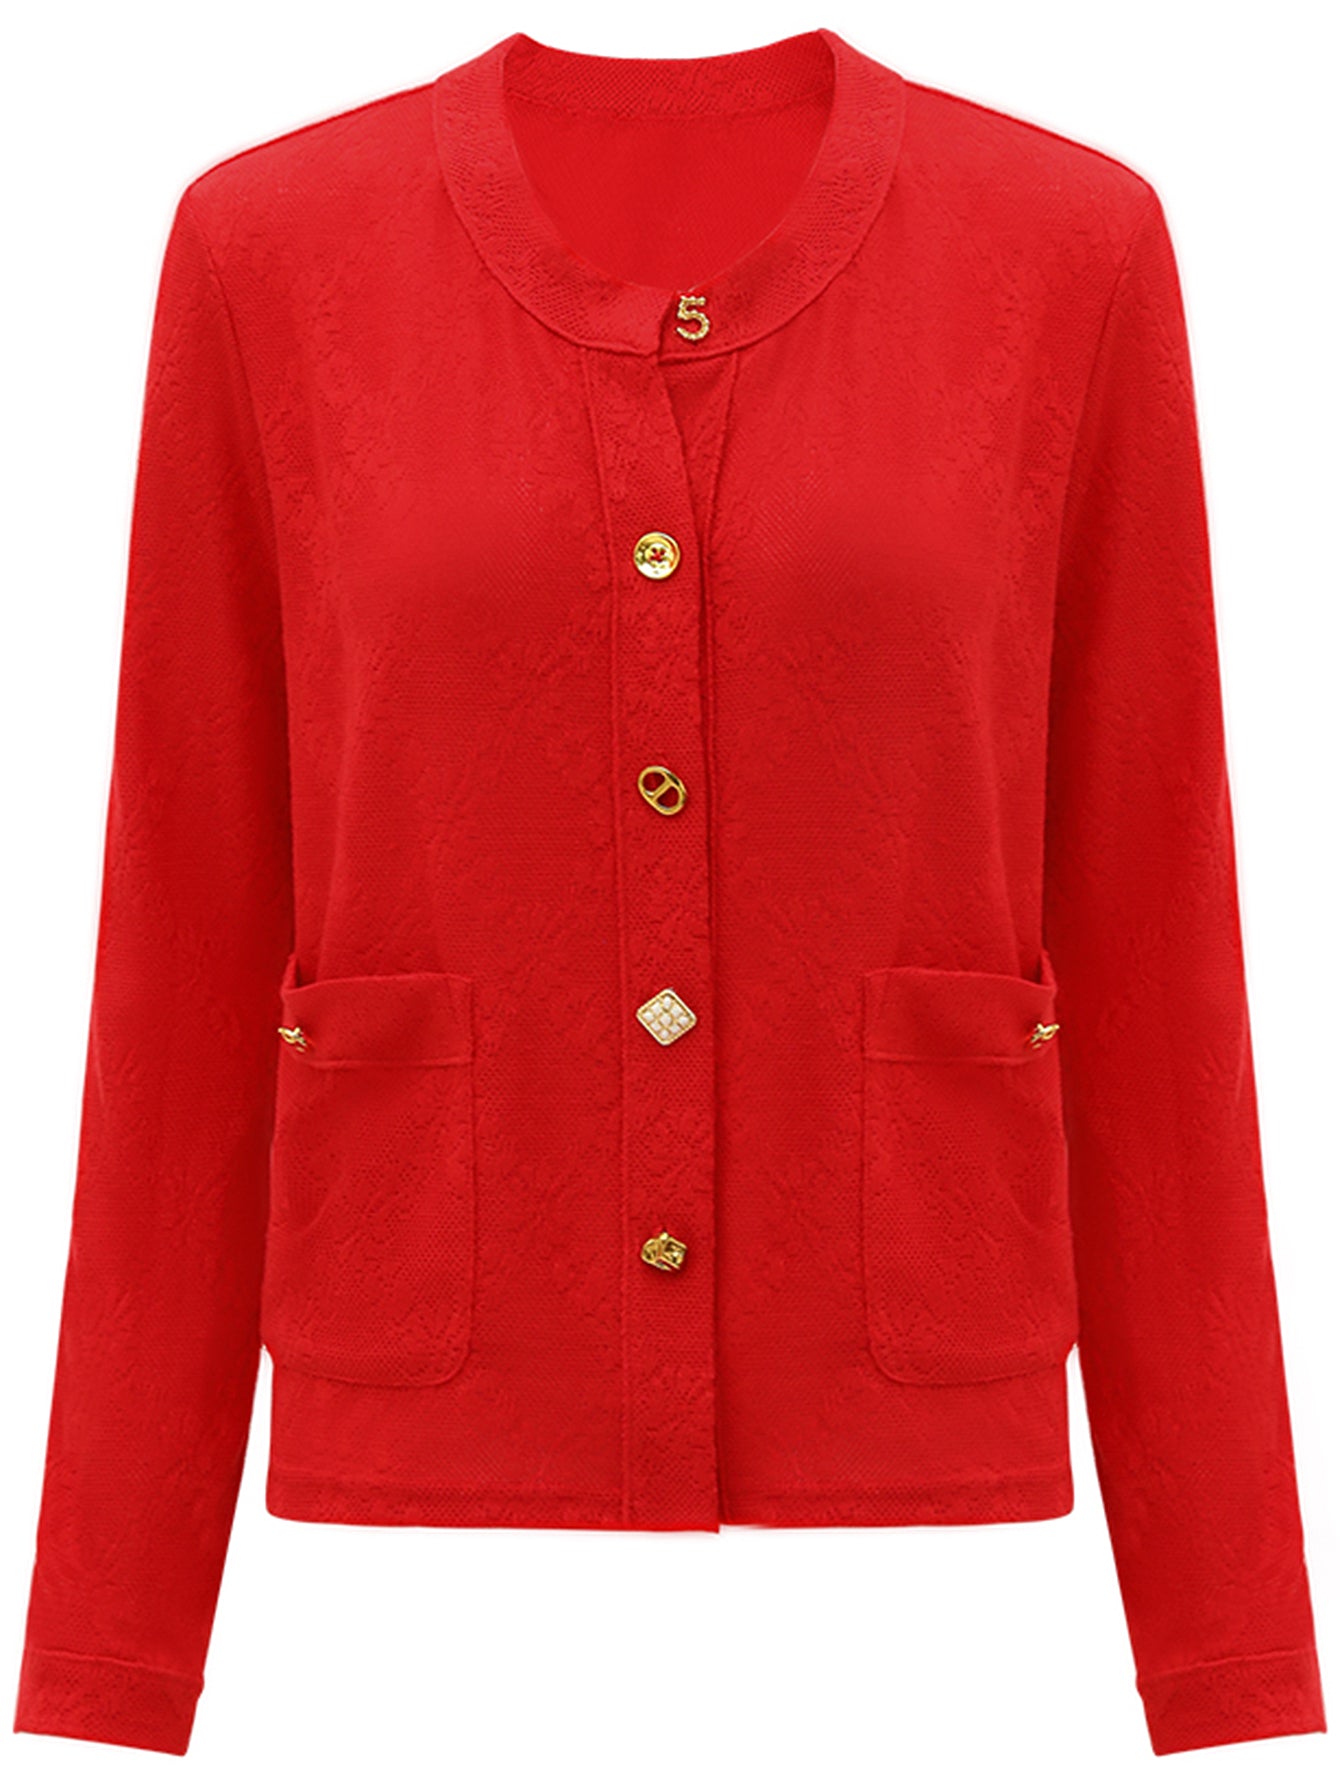 stylish-red-cardigan-with-gold-snap-buttons_all_red_4.jpg